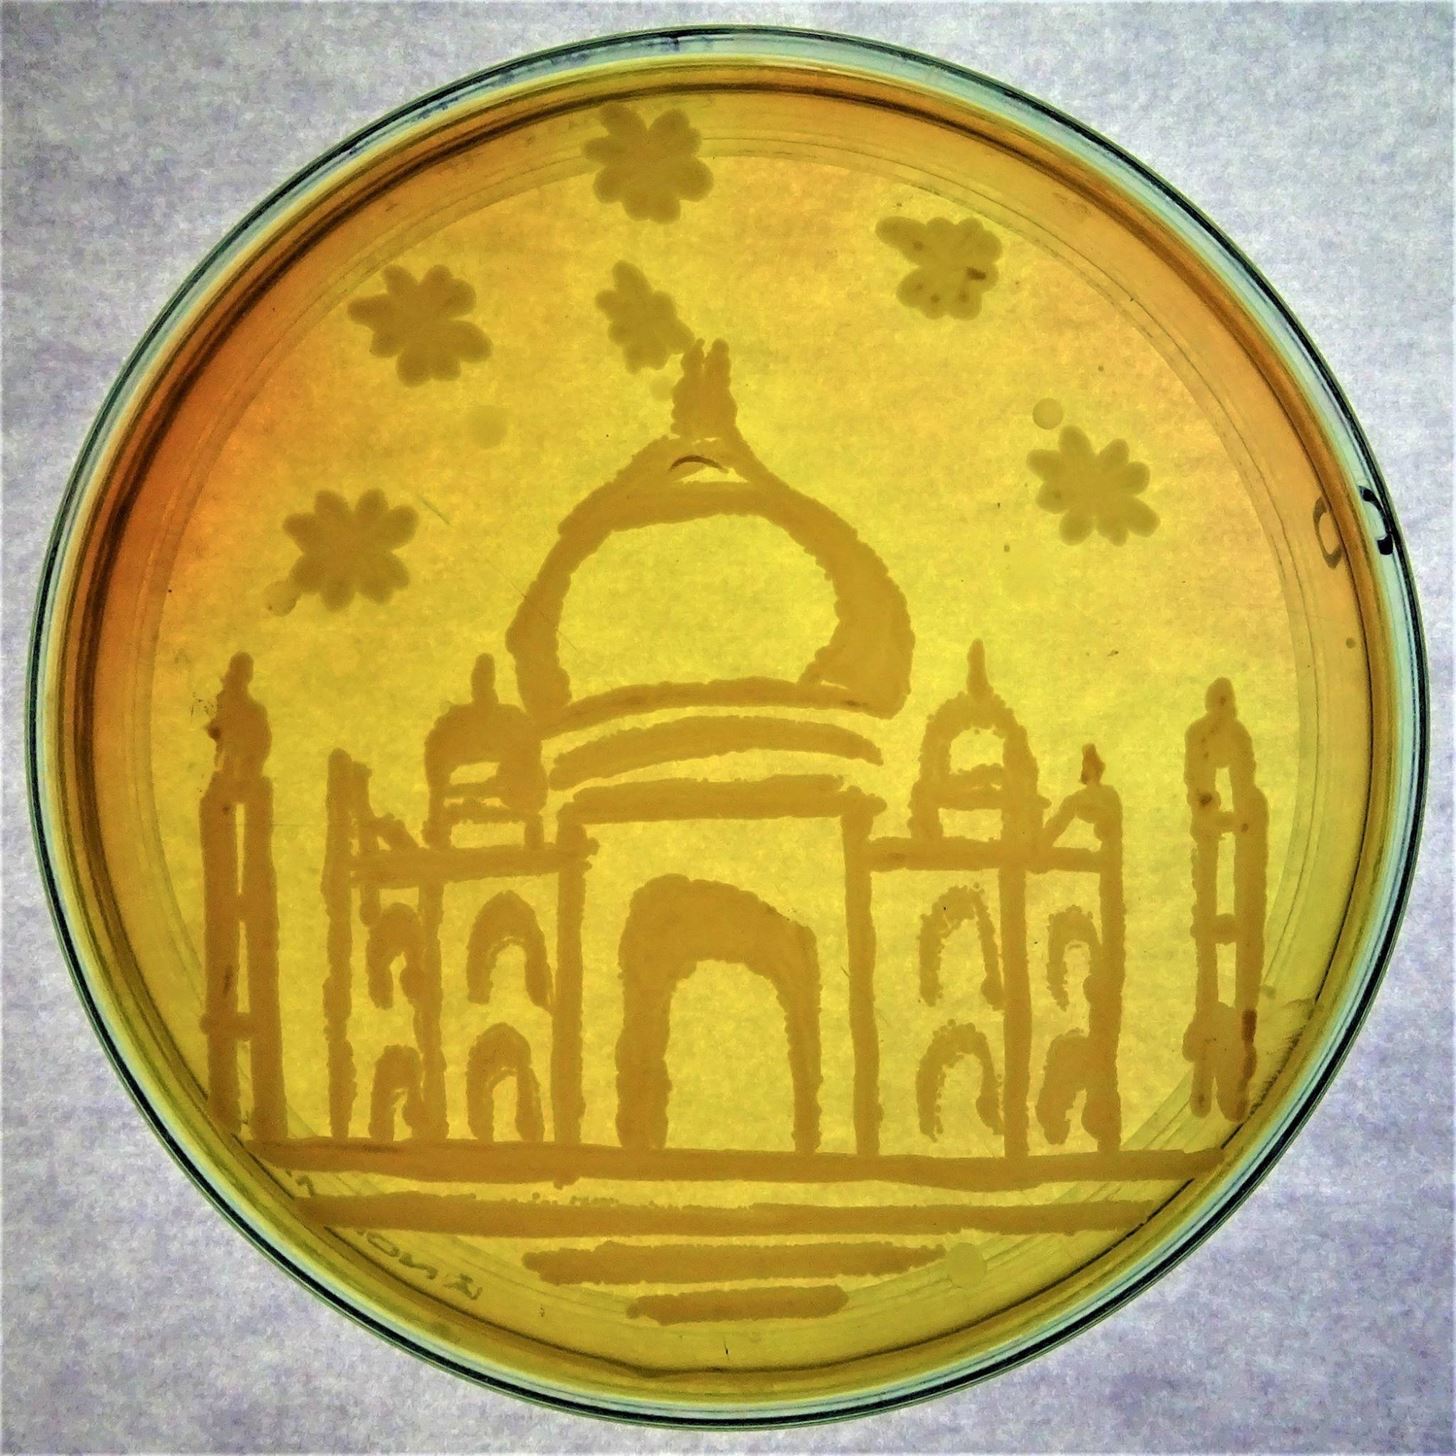 Our 11 Favorite Bacteria Art Submissions from ASM's Petri-Dish Picasso Contest